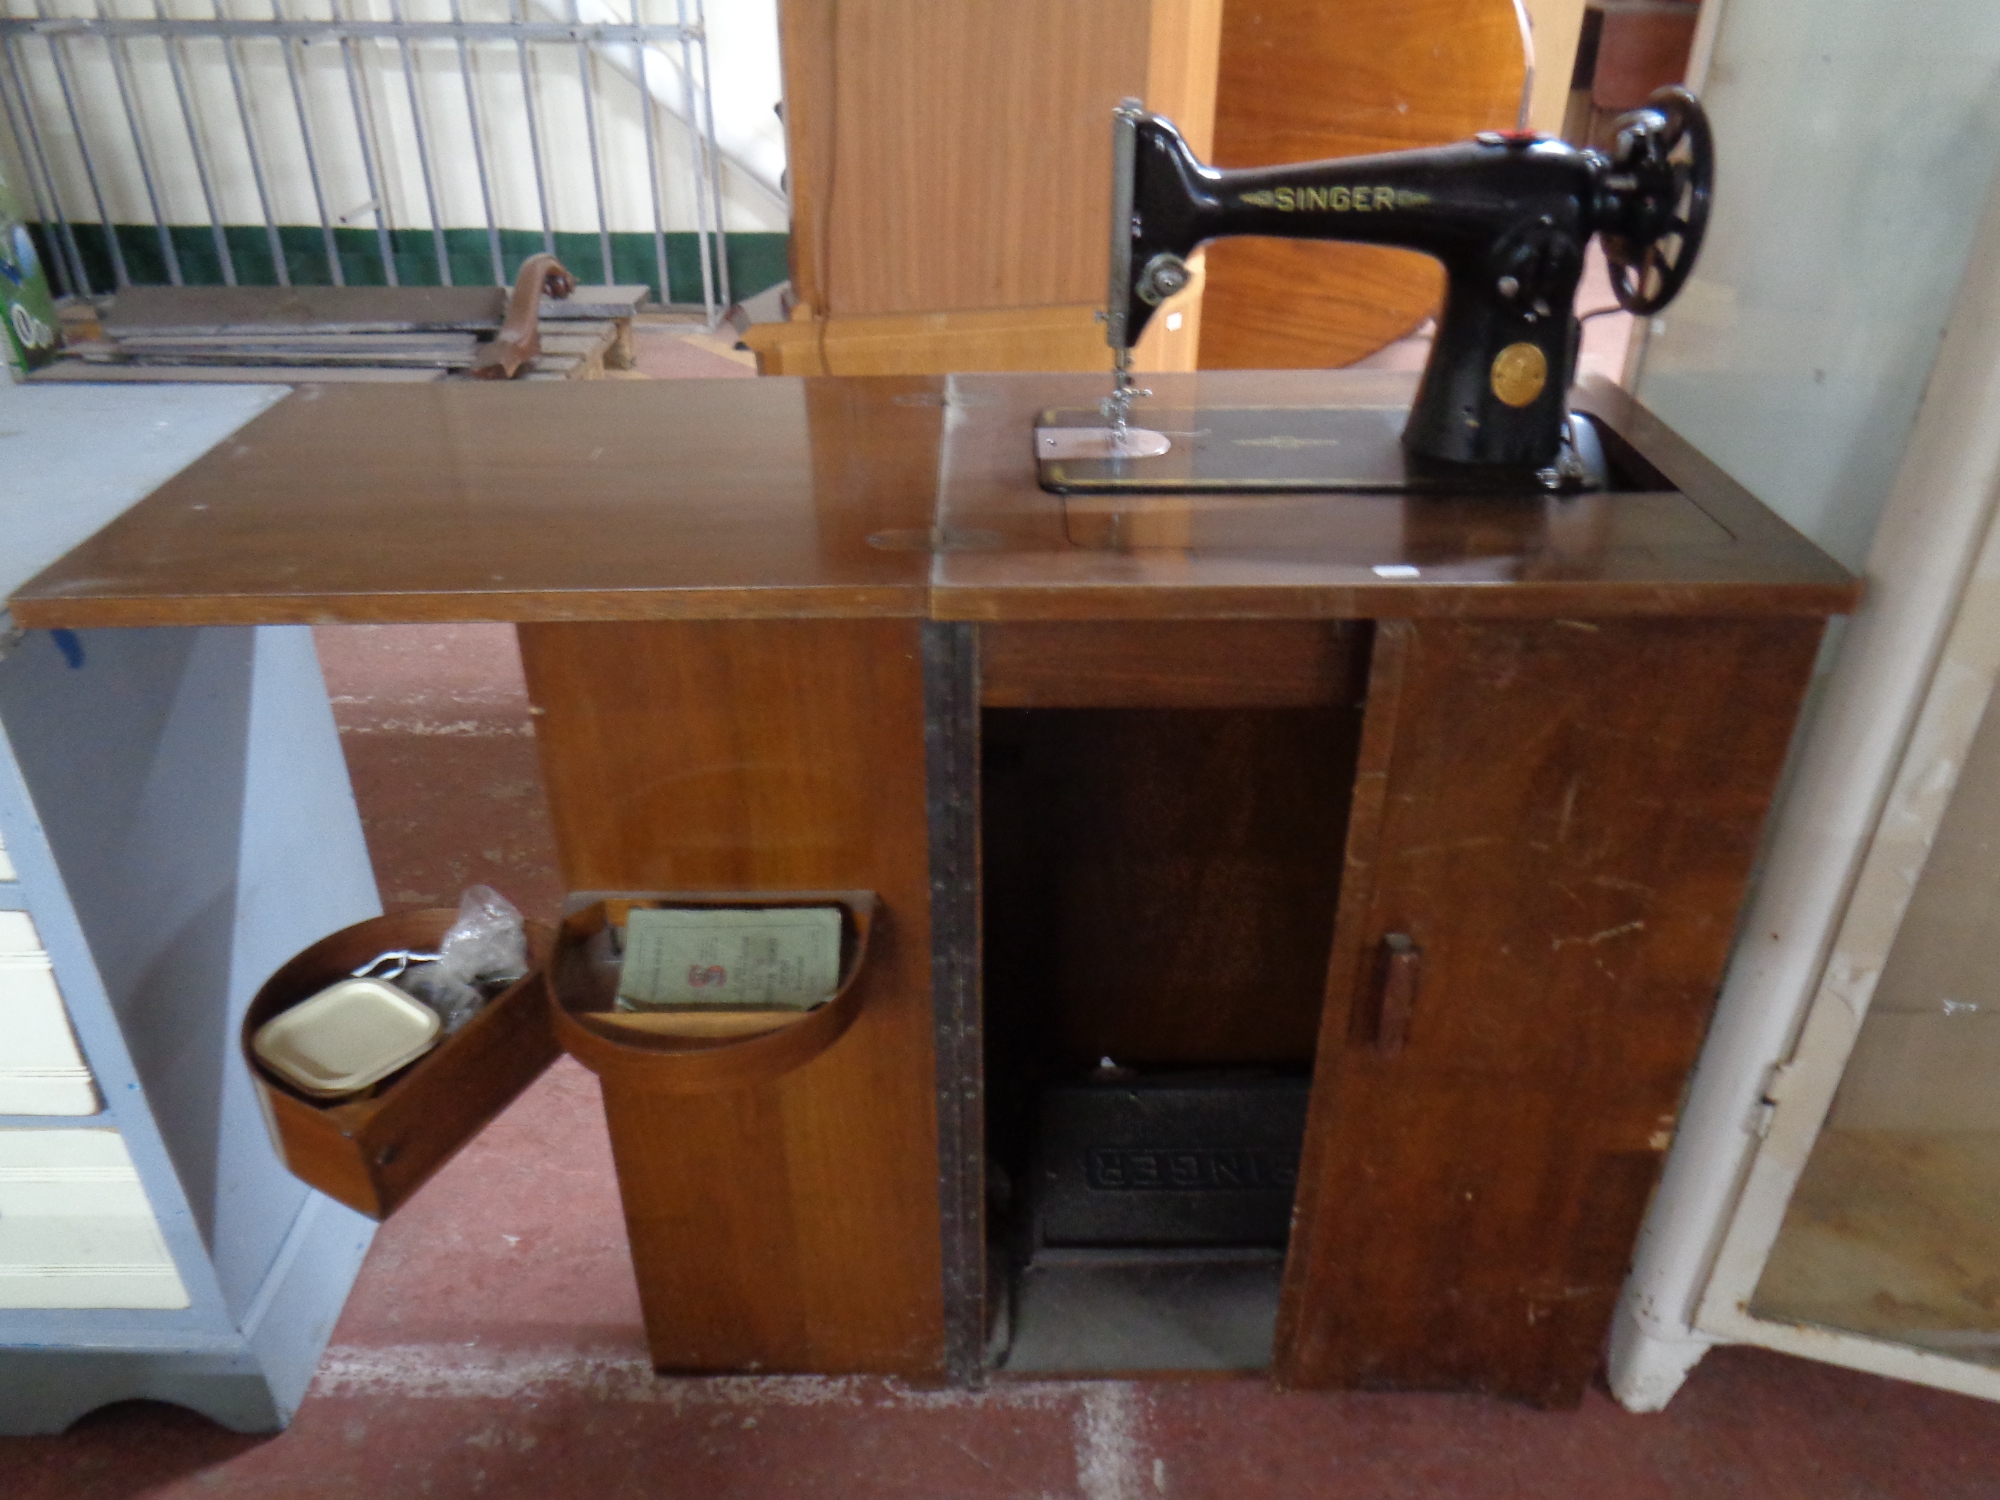 A 20th century Singer treadle sewing machine in cabinet